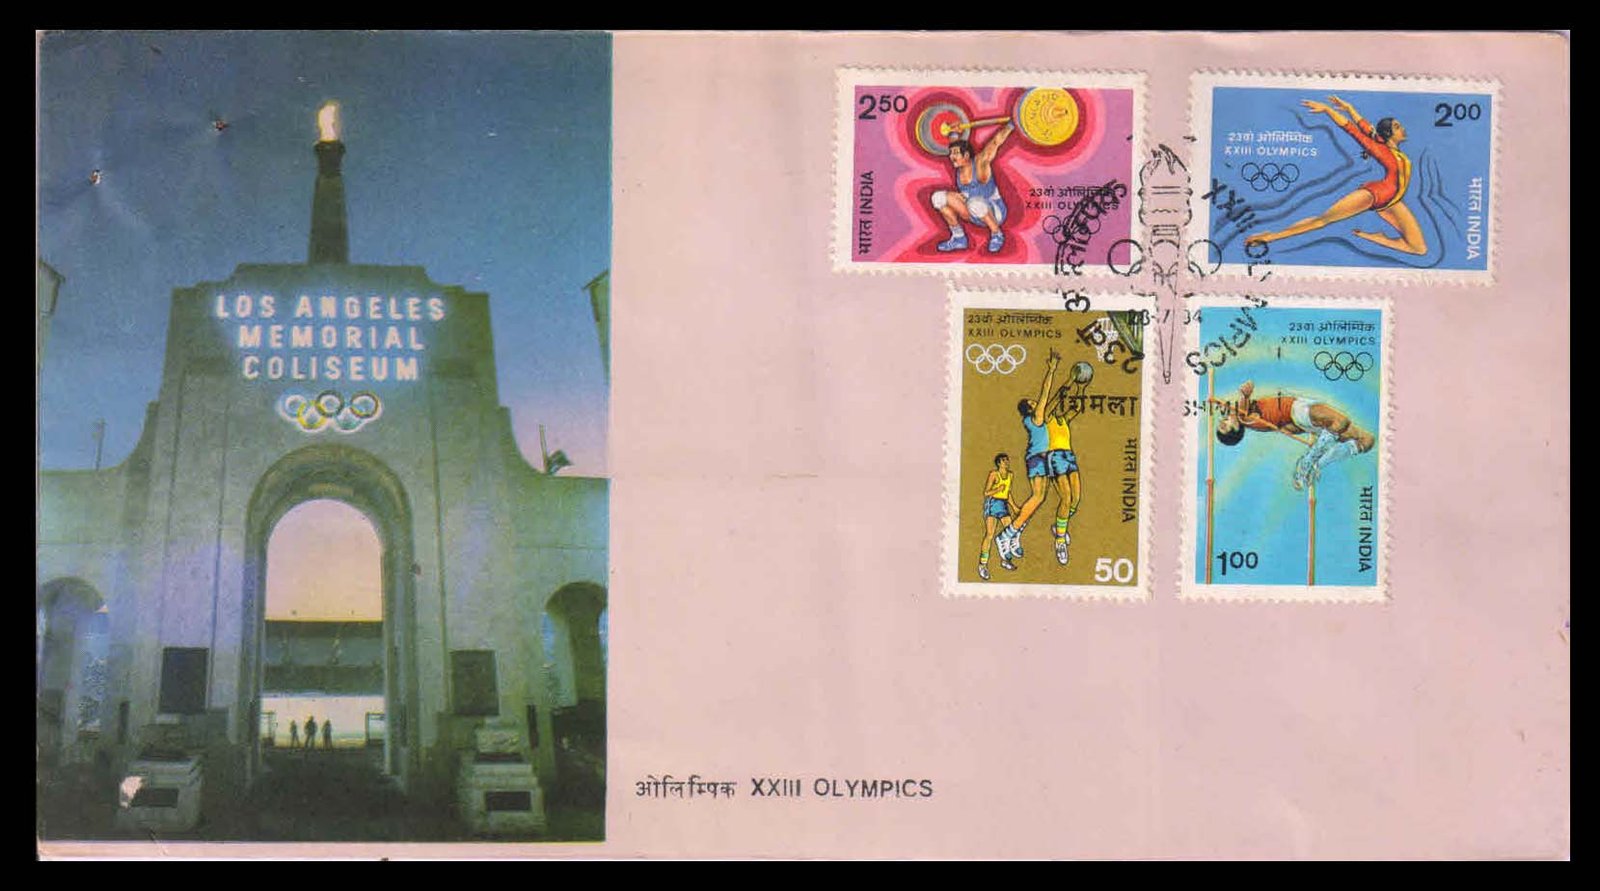 India 28-7-1984, XXIII Olympic Games, Los Angeles, Set of 4 Stamps on First Day Cover